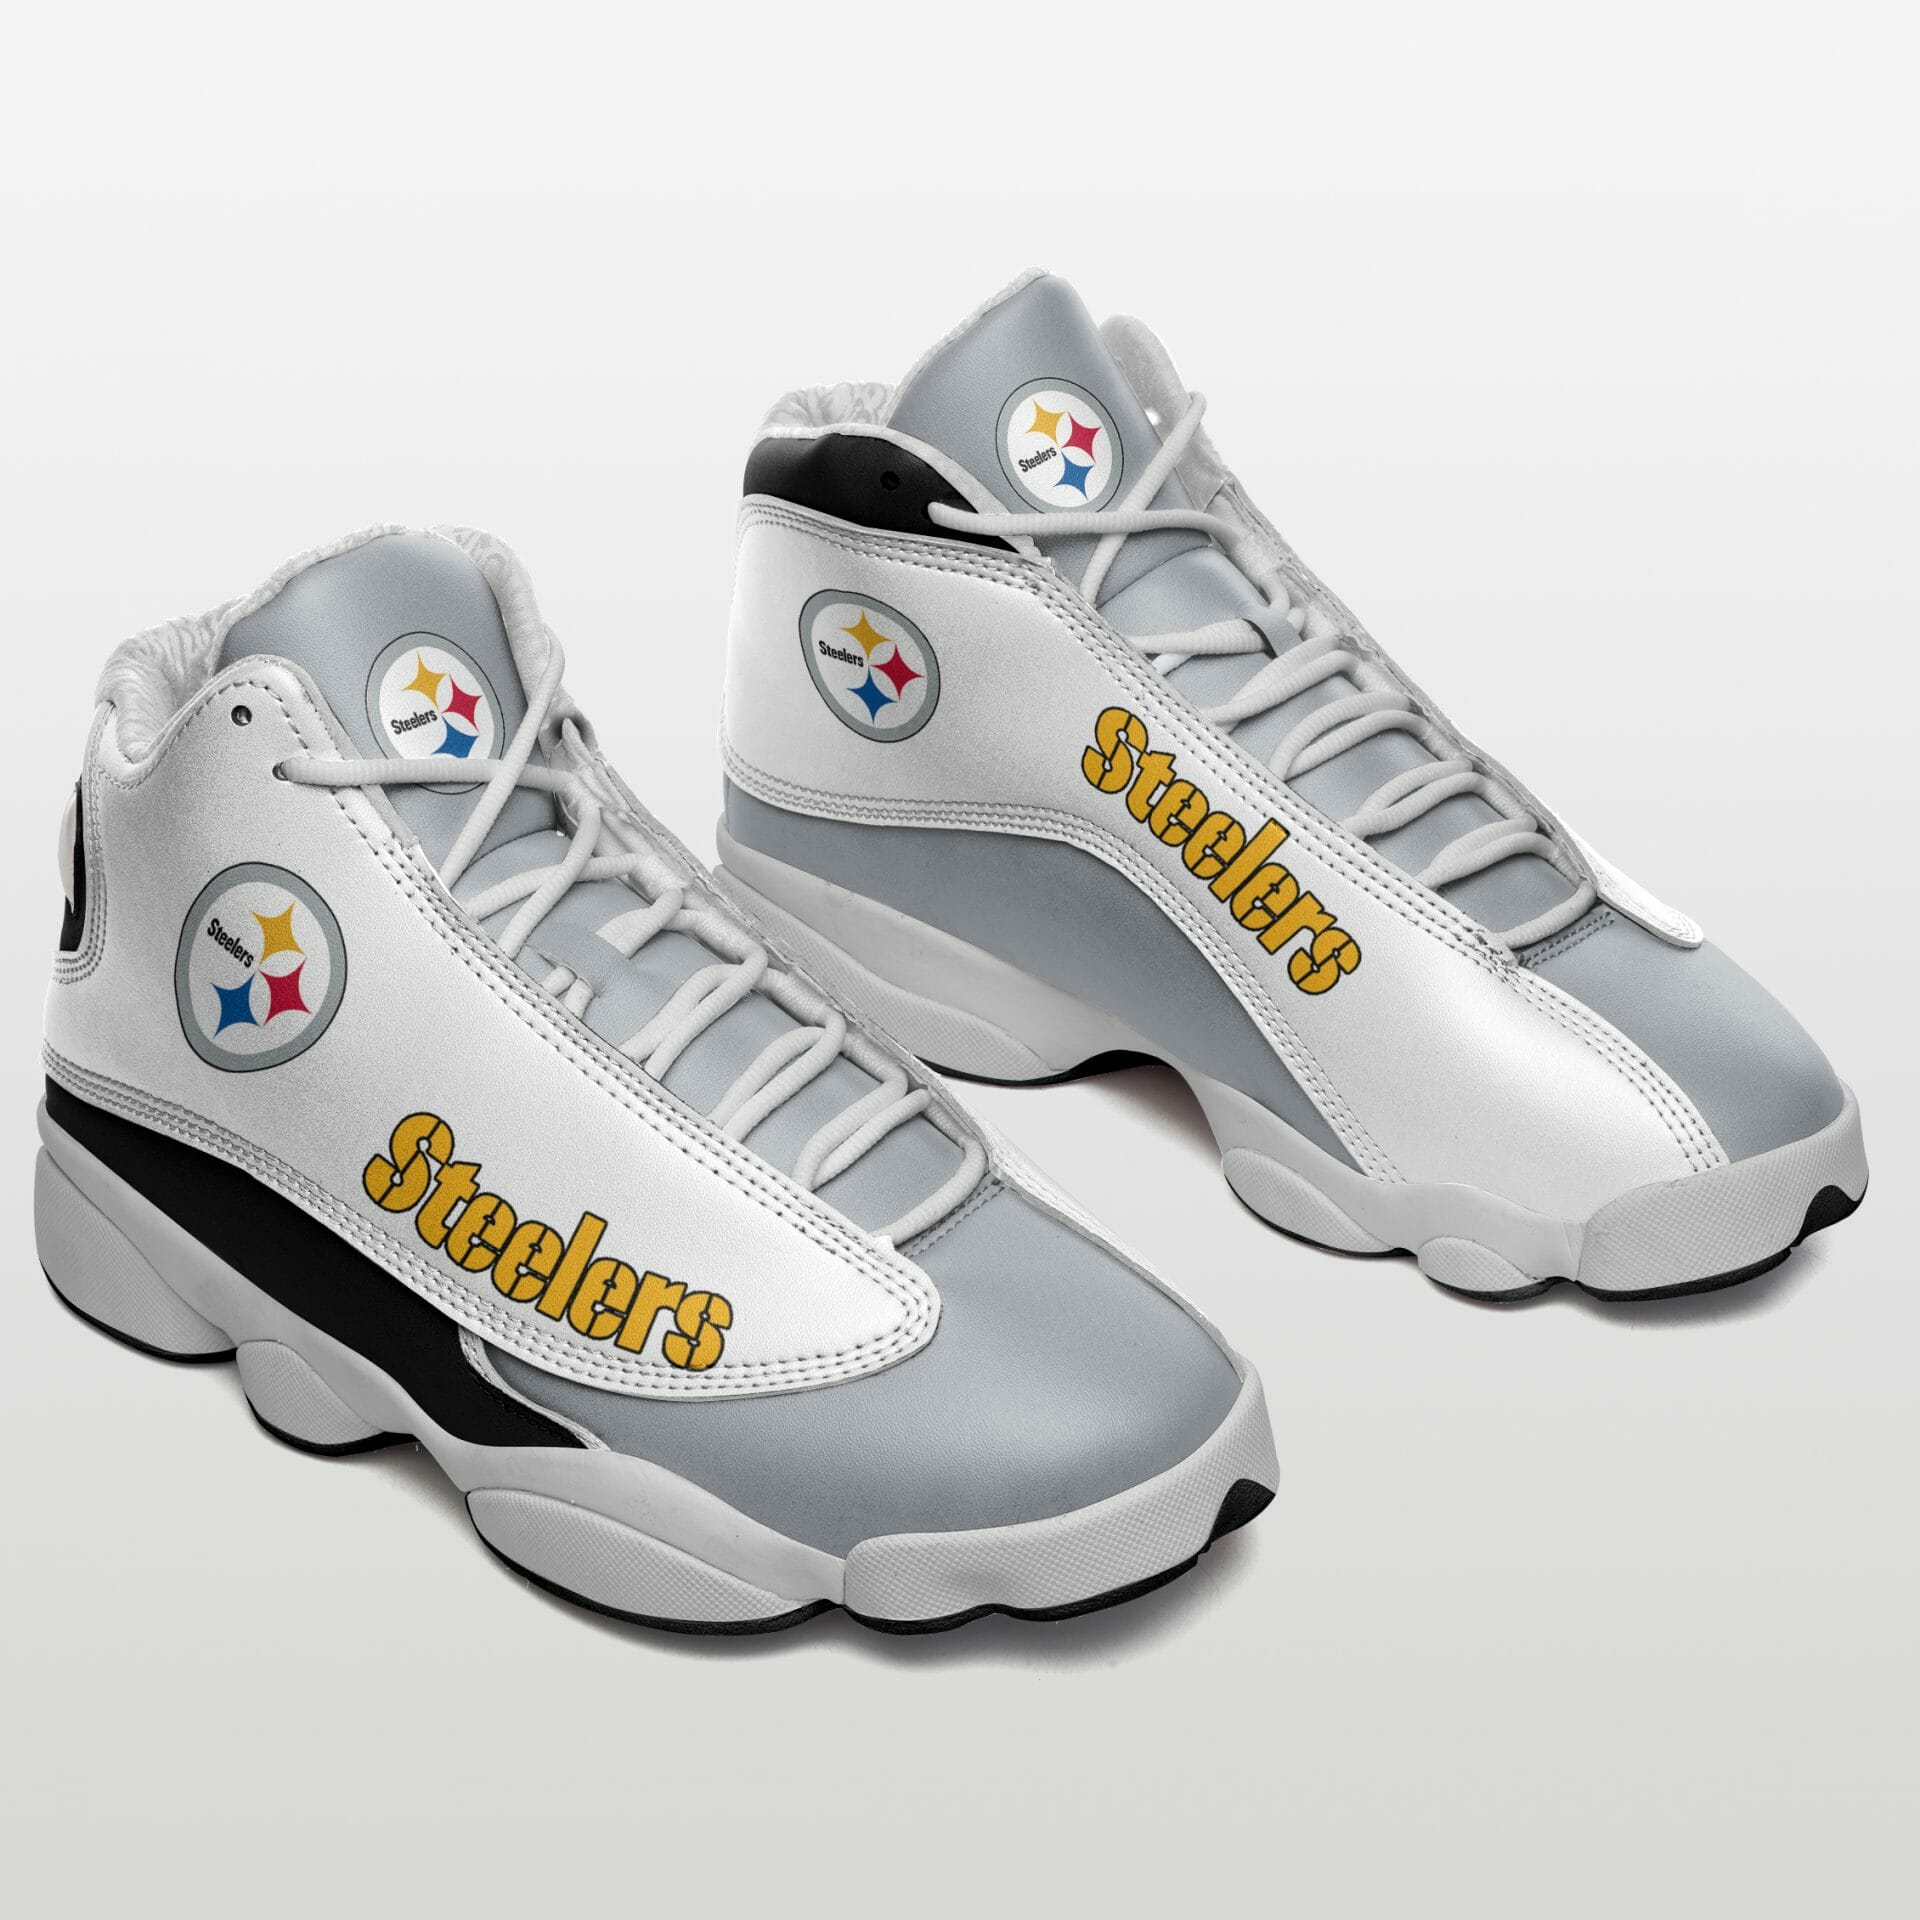 Pittsburgh Steelers Simple Design Air Jordan 13 Shoes Gift For Fans photo